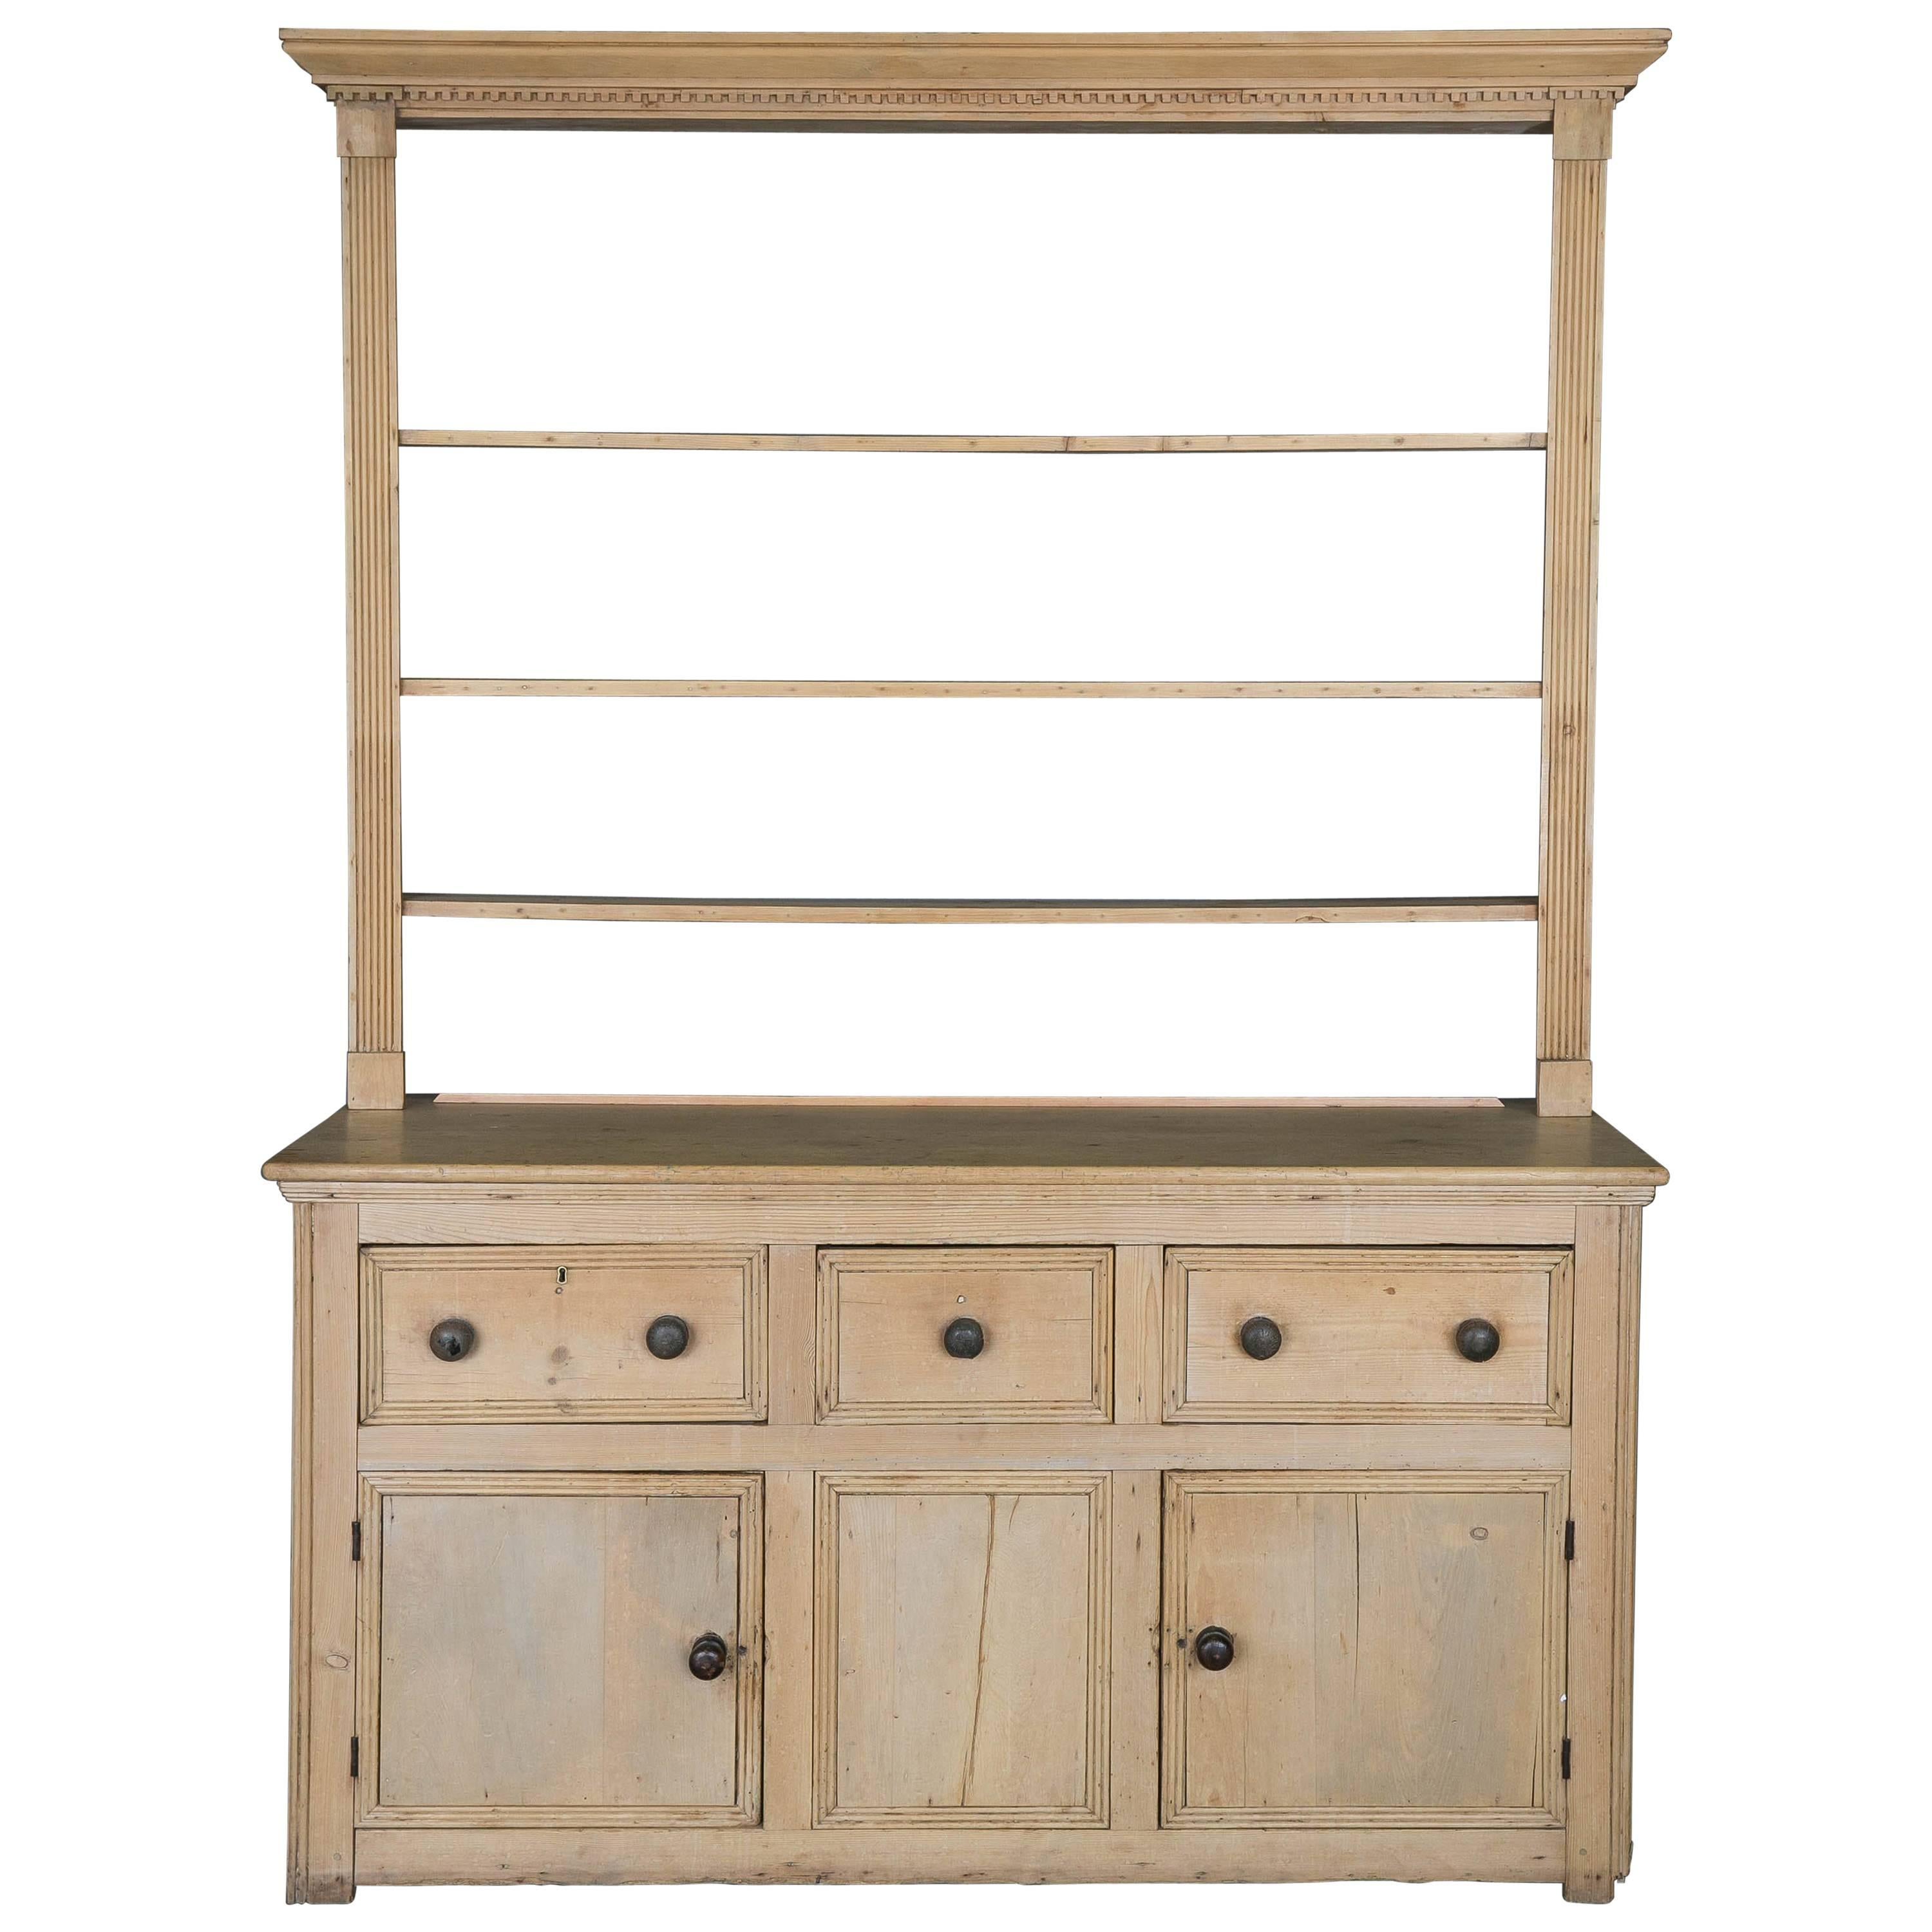 19th Century Washed Pine Welsh Dresser with Plate Rack